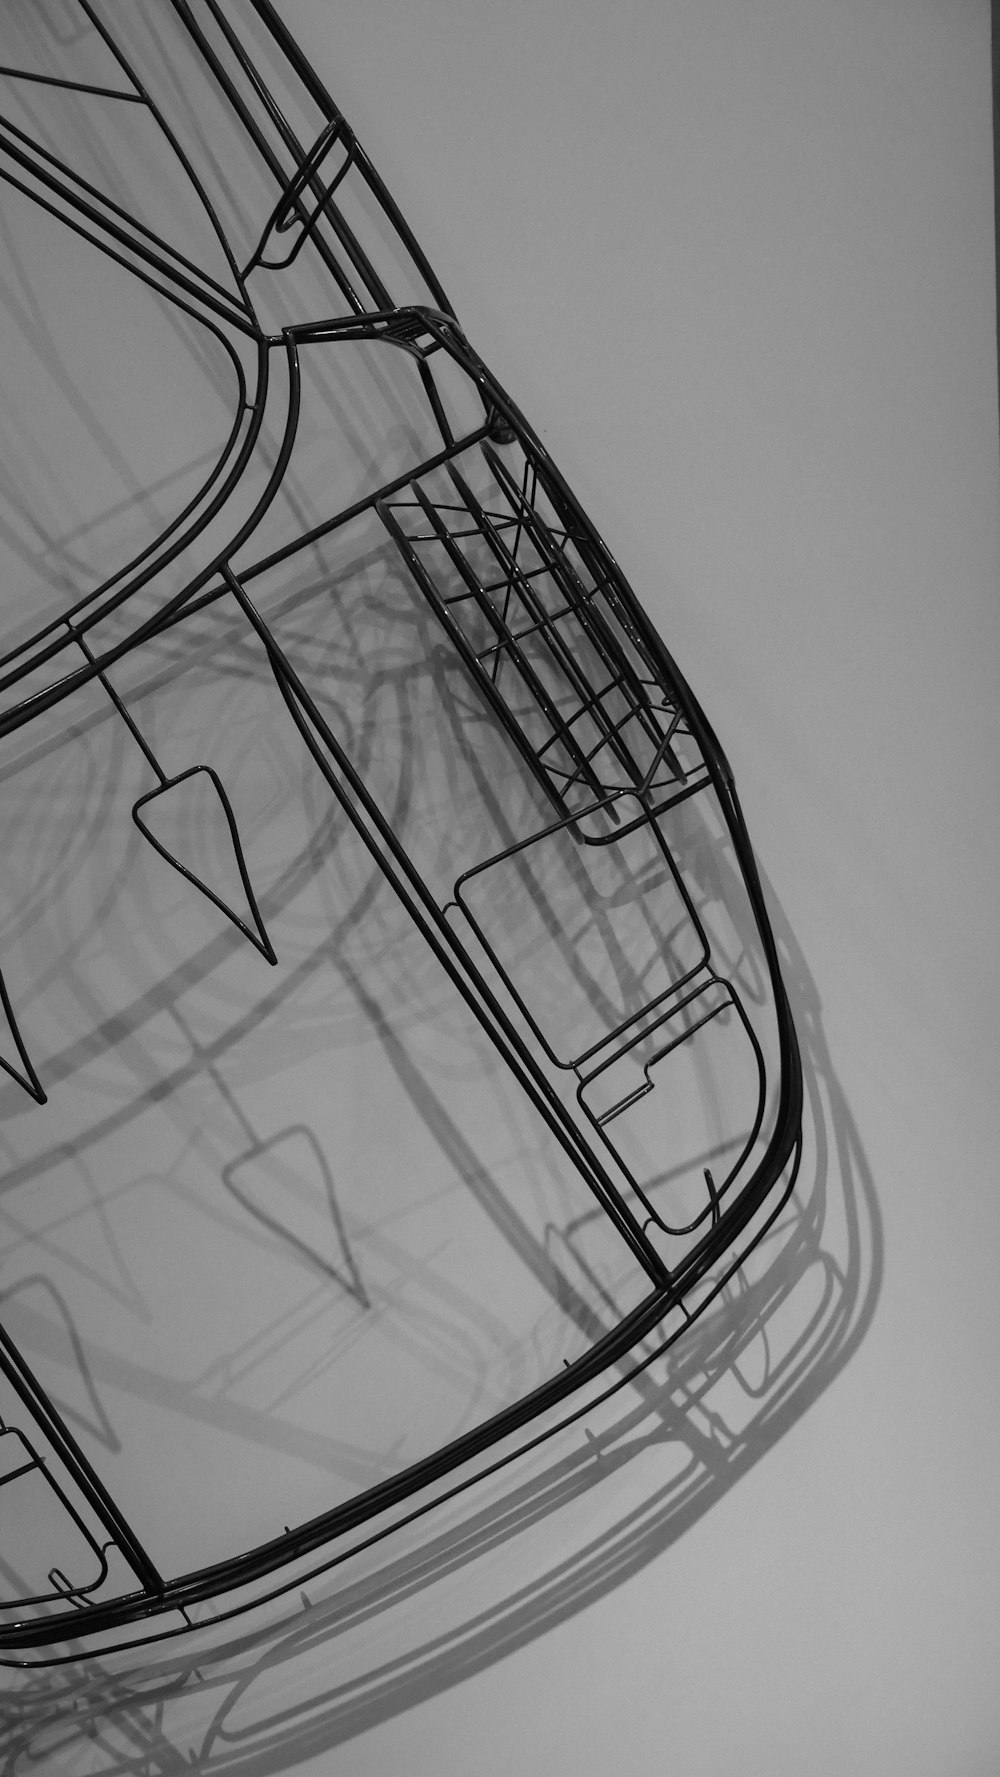 a drawing of a car is shown in black and white